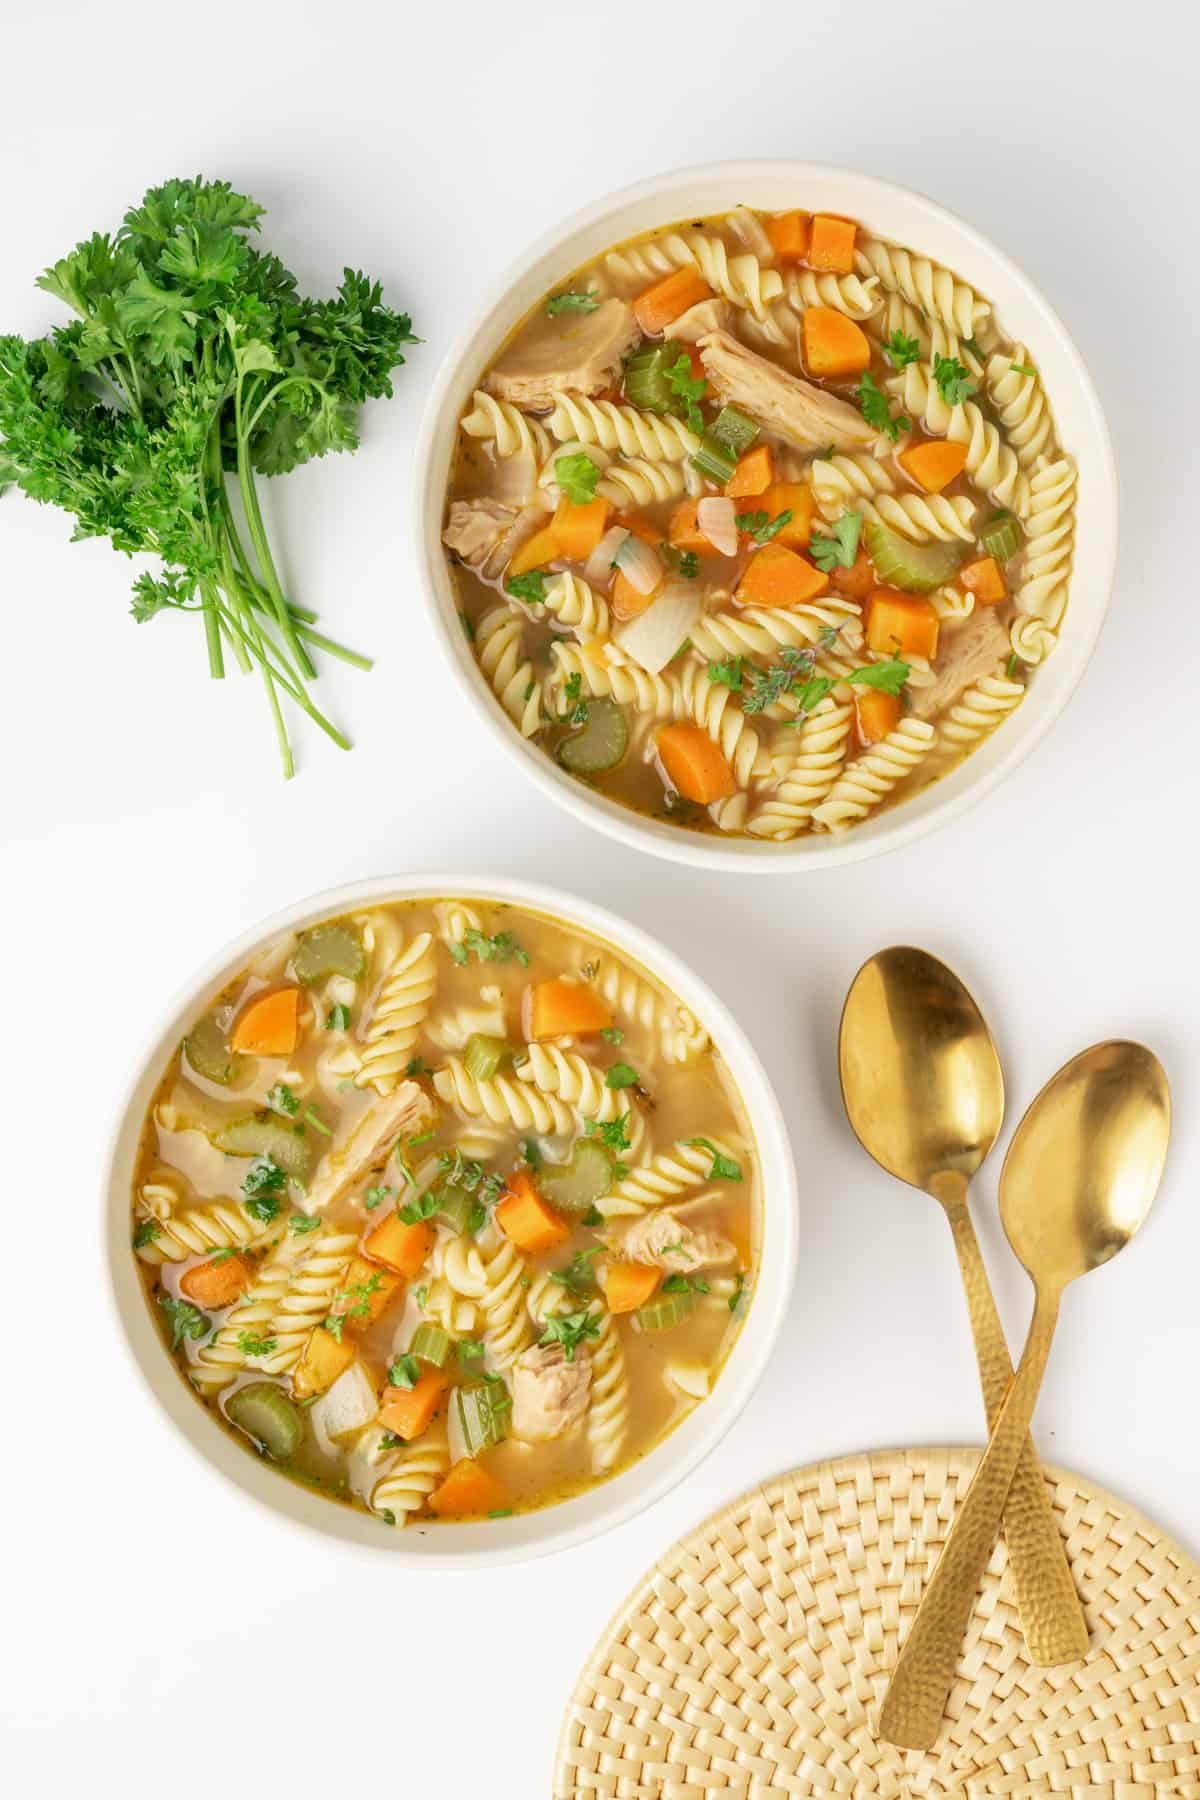 Two bowls of vegan chicken noodle soup.